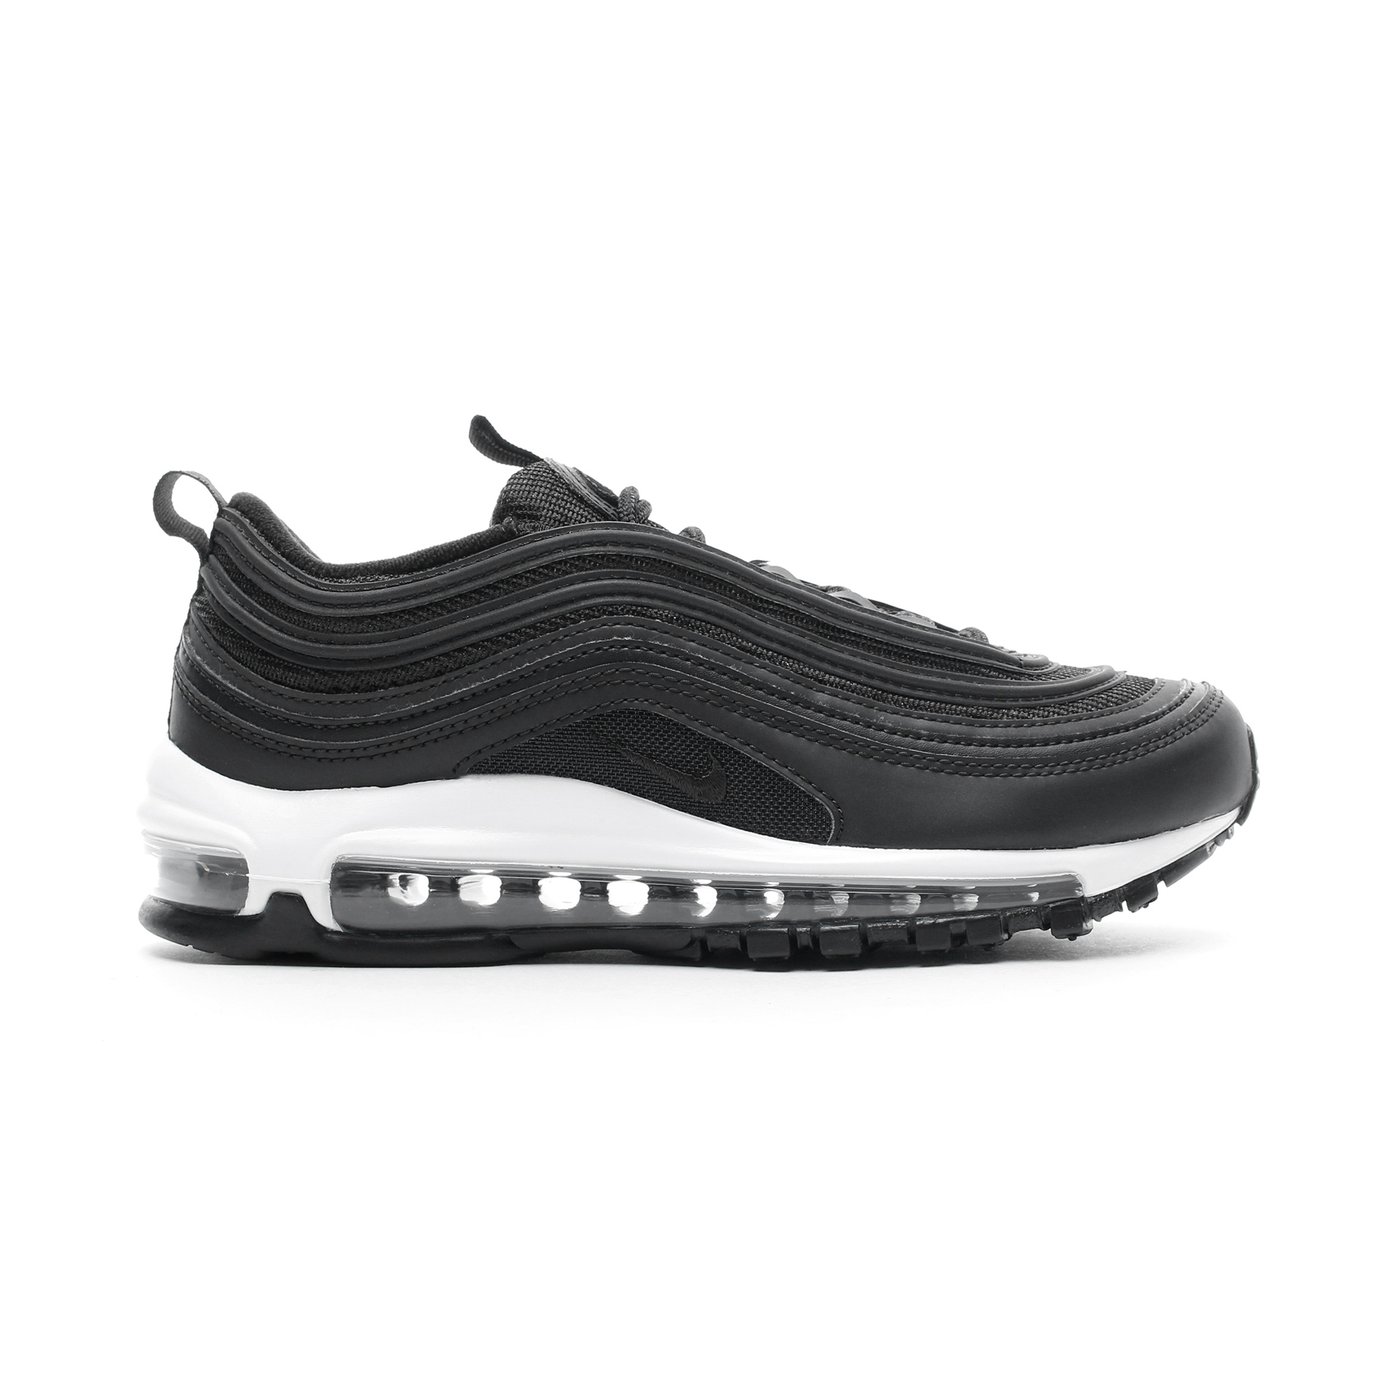 Nike air max 97 black patent grey reftelect trainers size 9